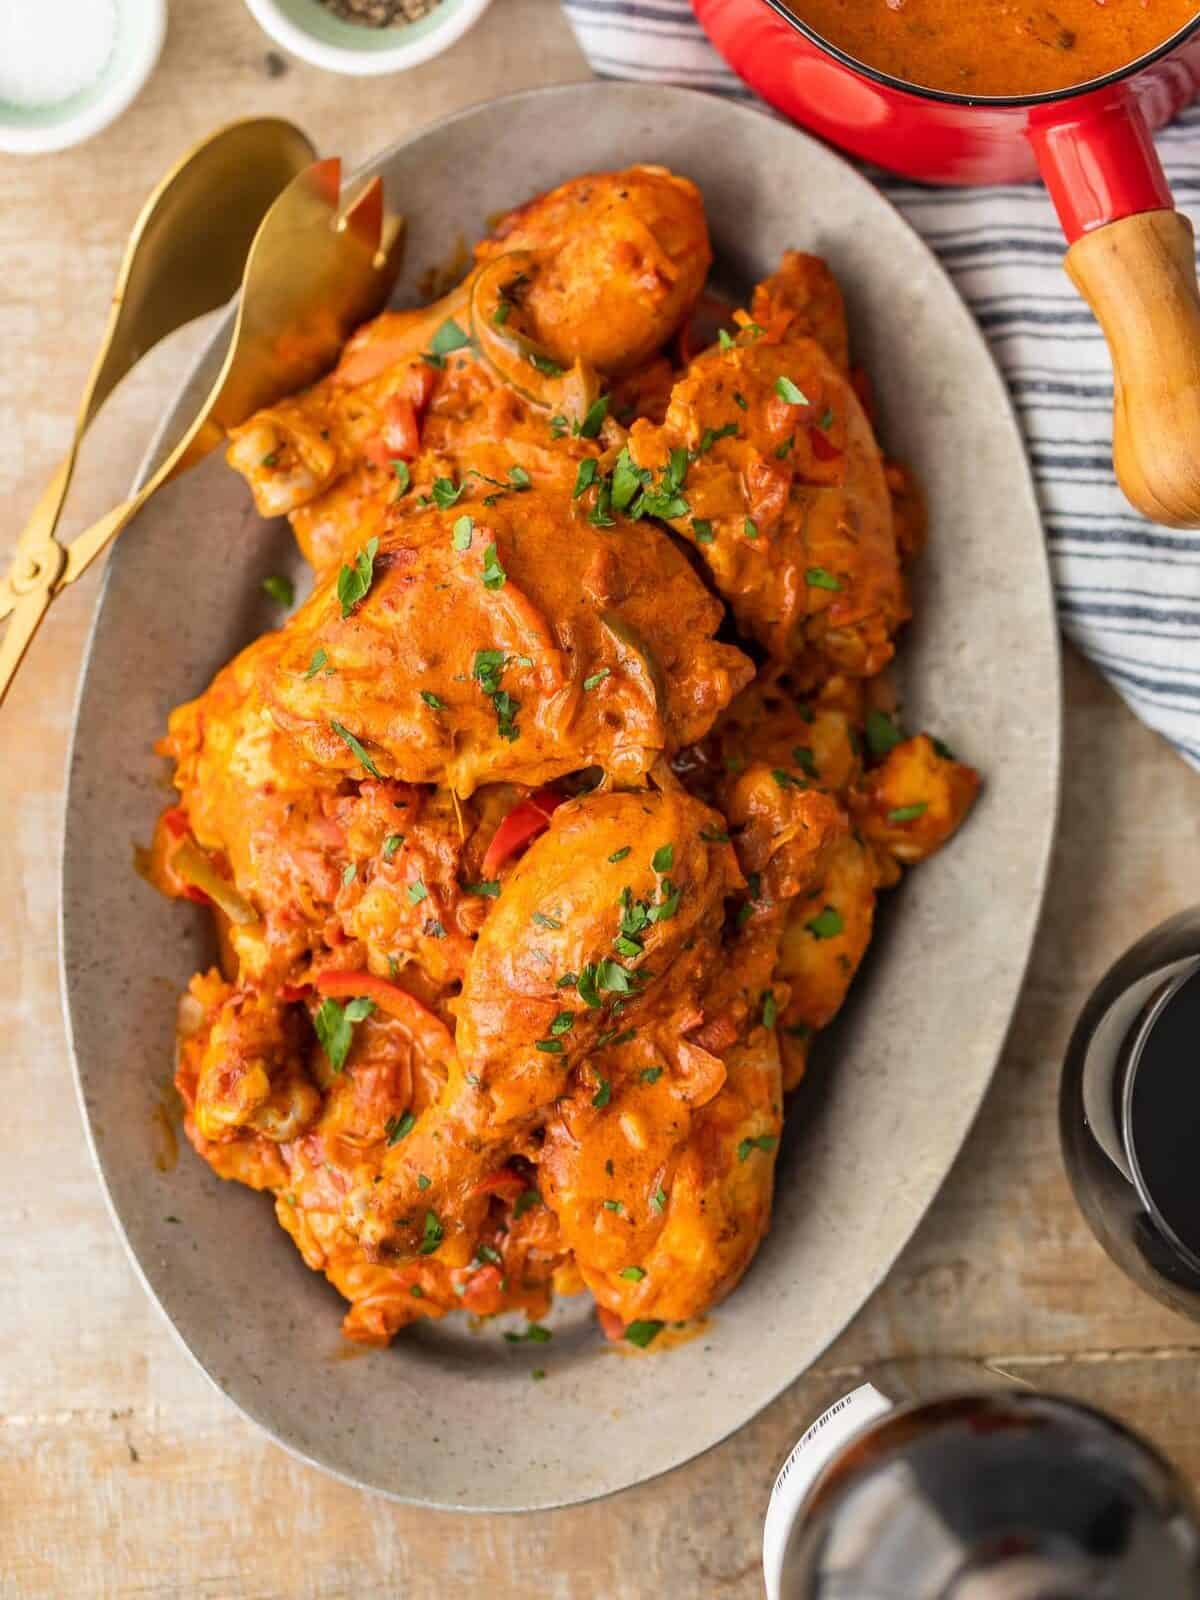 Creamy Chicken Paprikash is a traditional Hungarian Chicken Recipe with so much flavor! This Chicken Paprikash Recipe is unique, vibrant, and delicious.